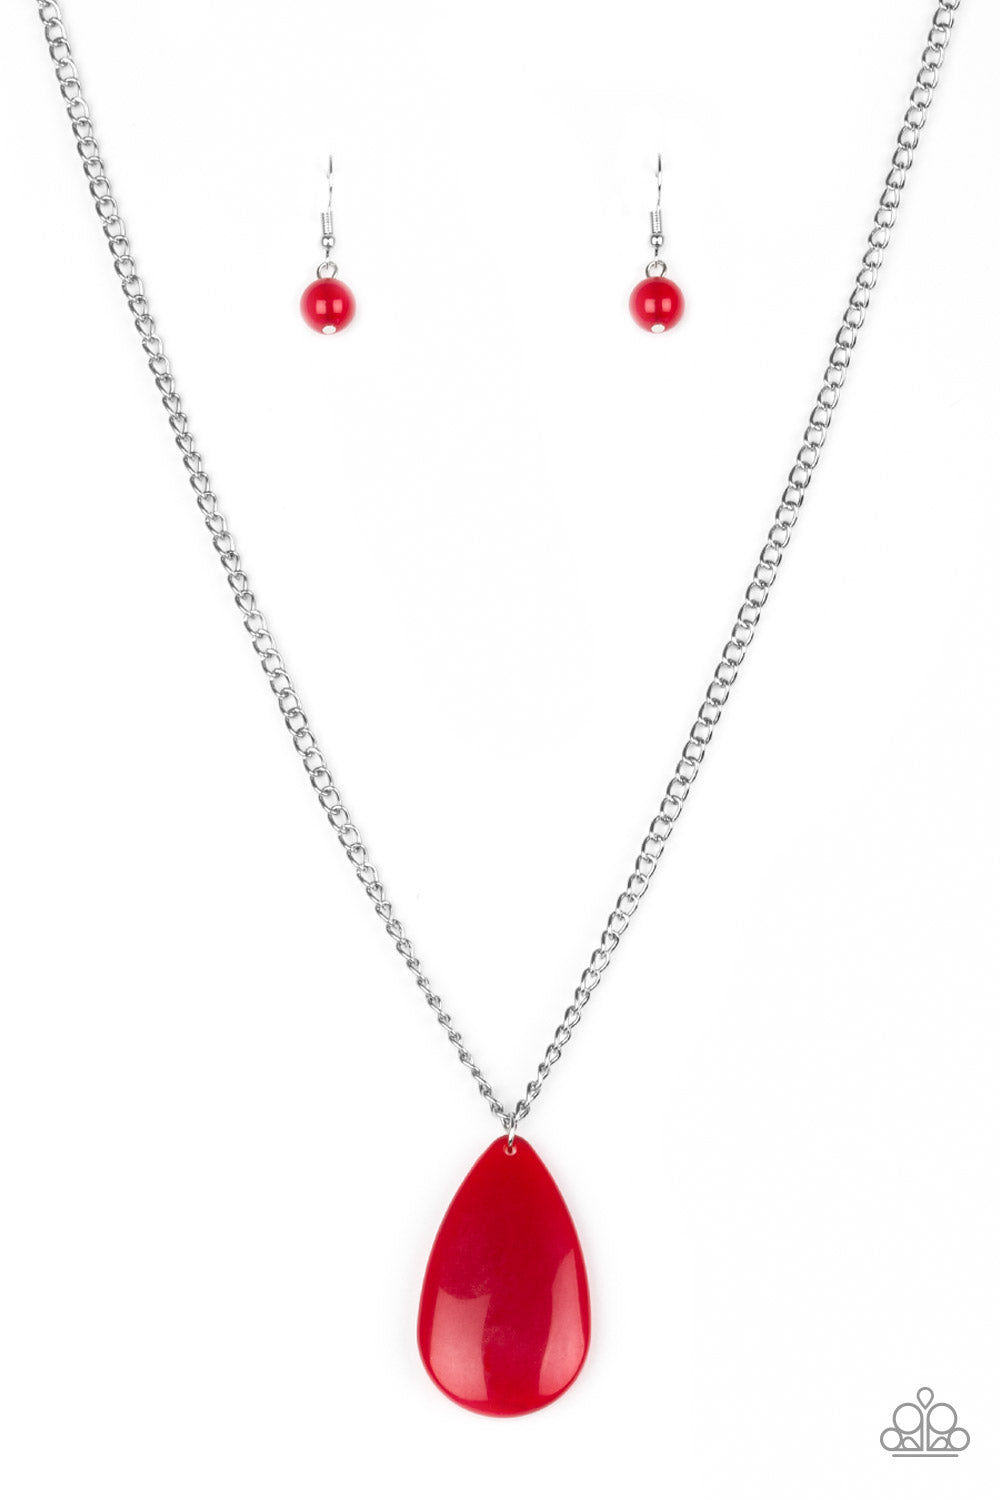 So Pop You Lar Red Necklace